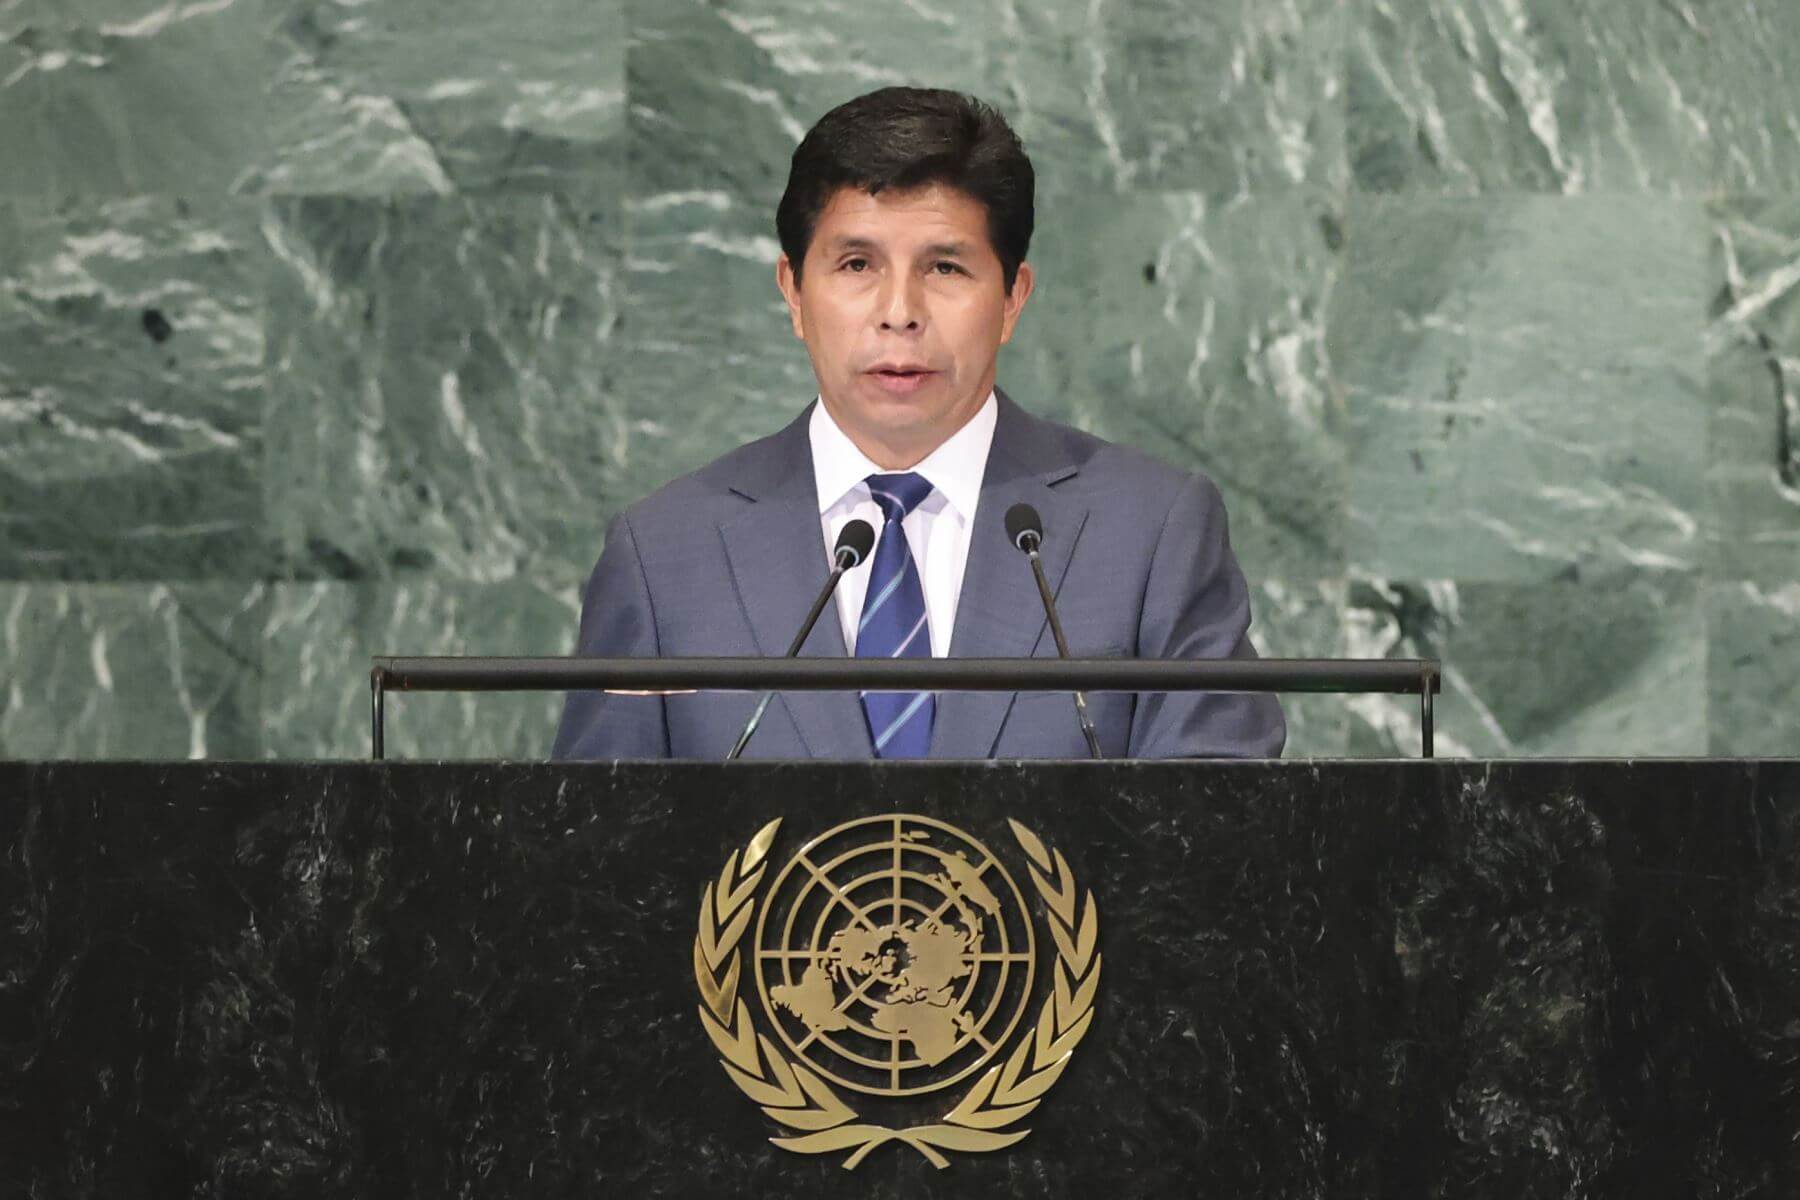 President Castillo’s UNGA speech: A representative office for Peru in Palestine, a call out of coups, and solidarity with Argentina over Falkland Islands